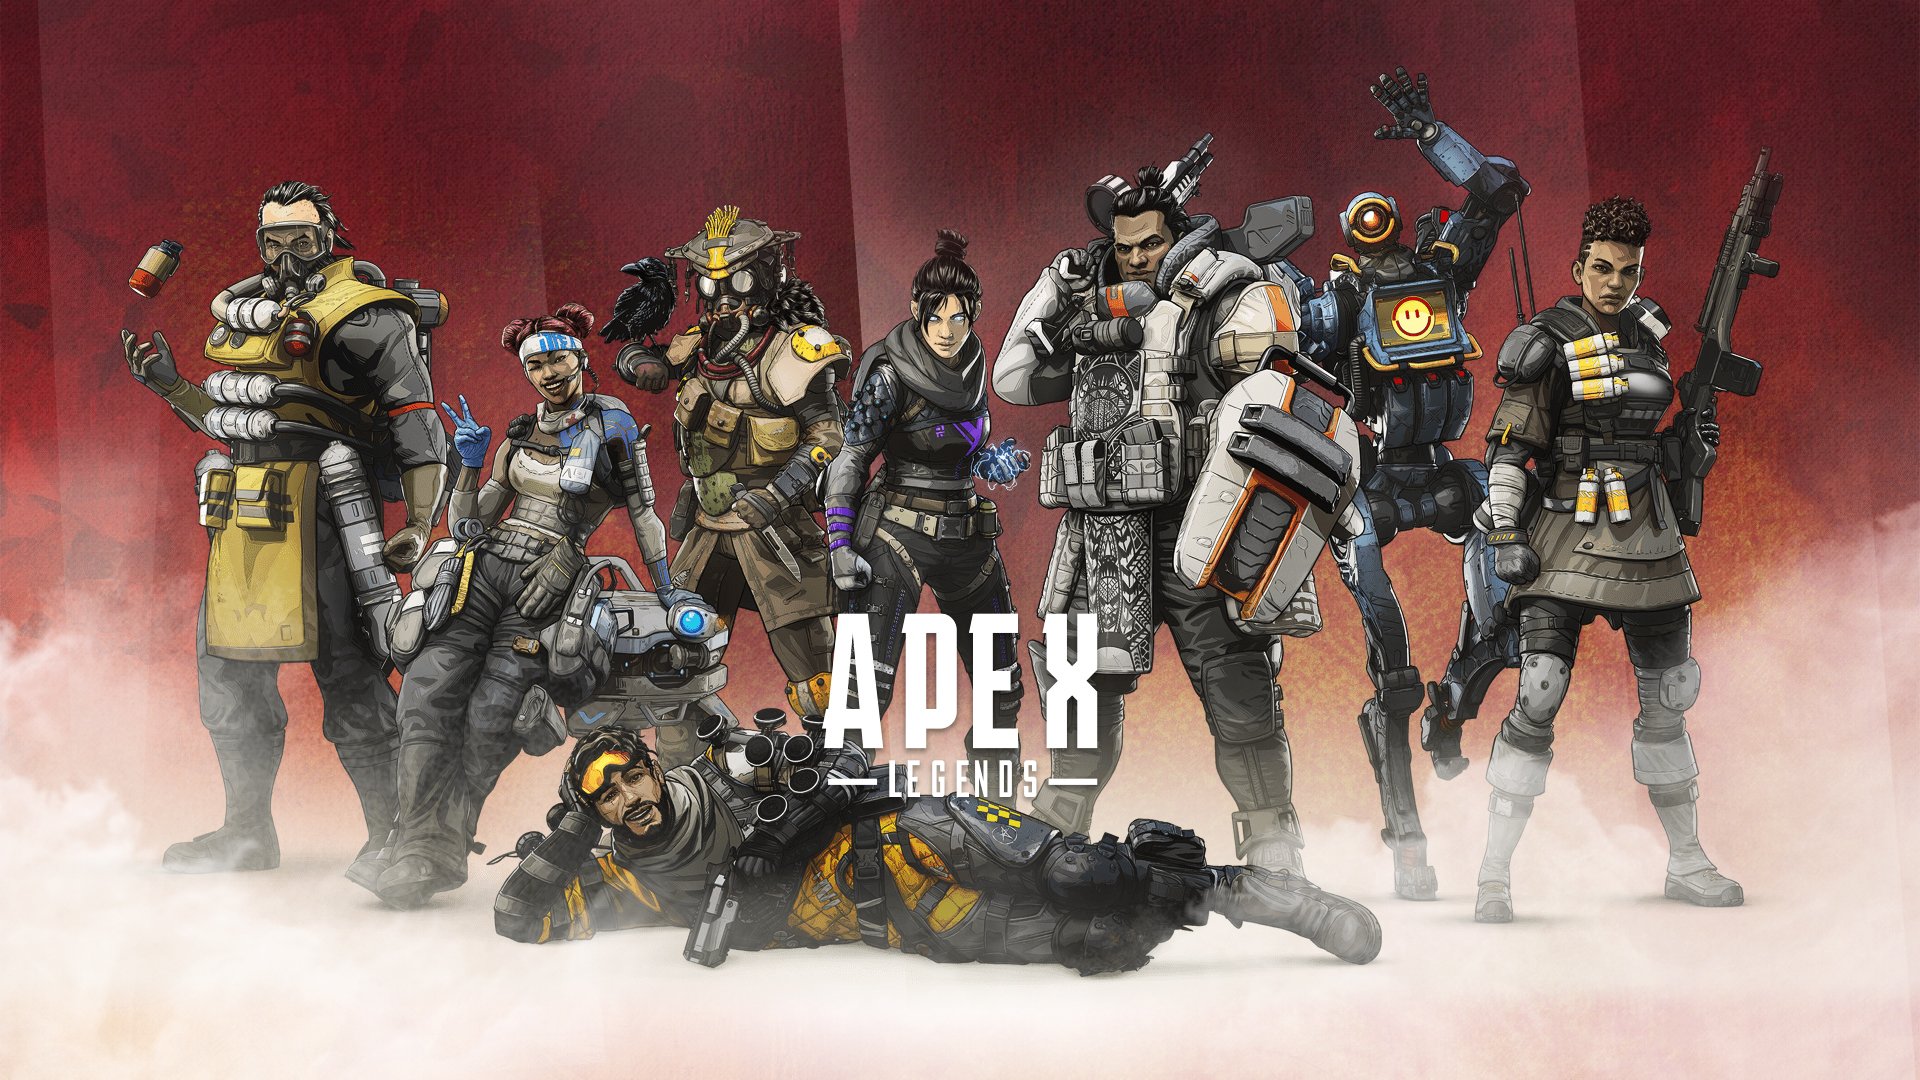 Apex Legend Wallpaper 4k Full Hd 10x480 Wallpaper For Pc Android Iphone